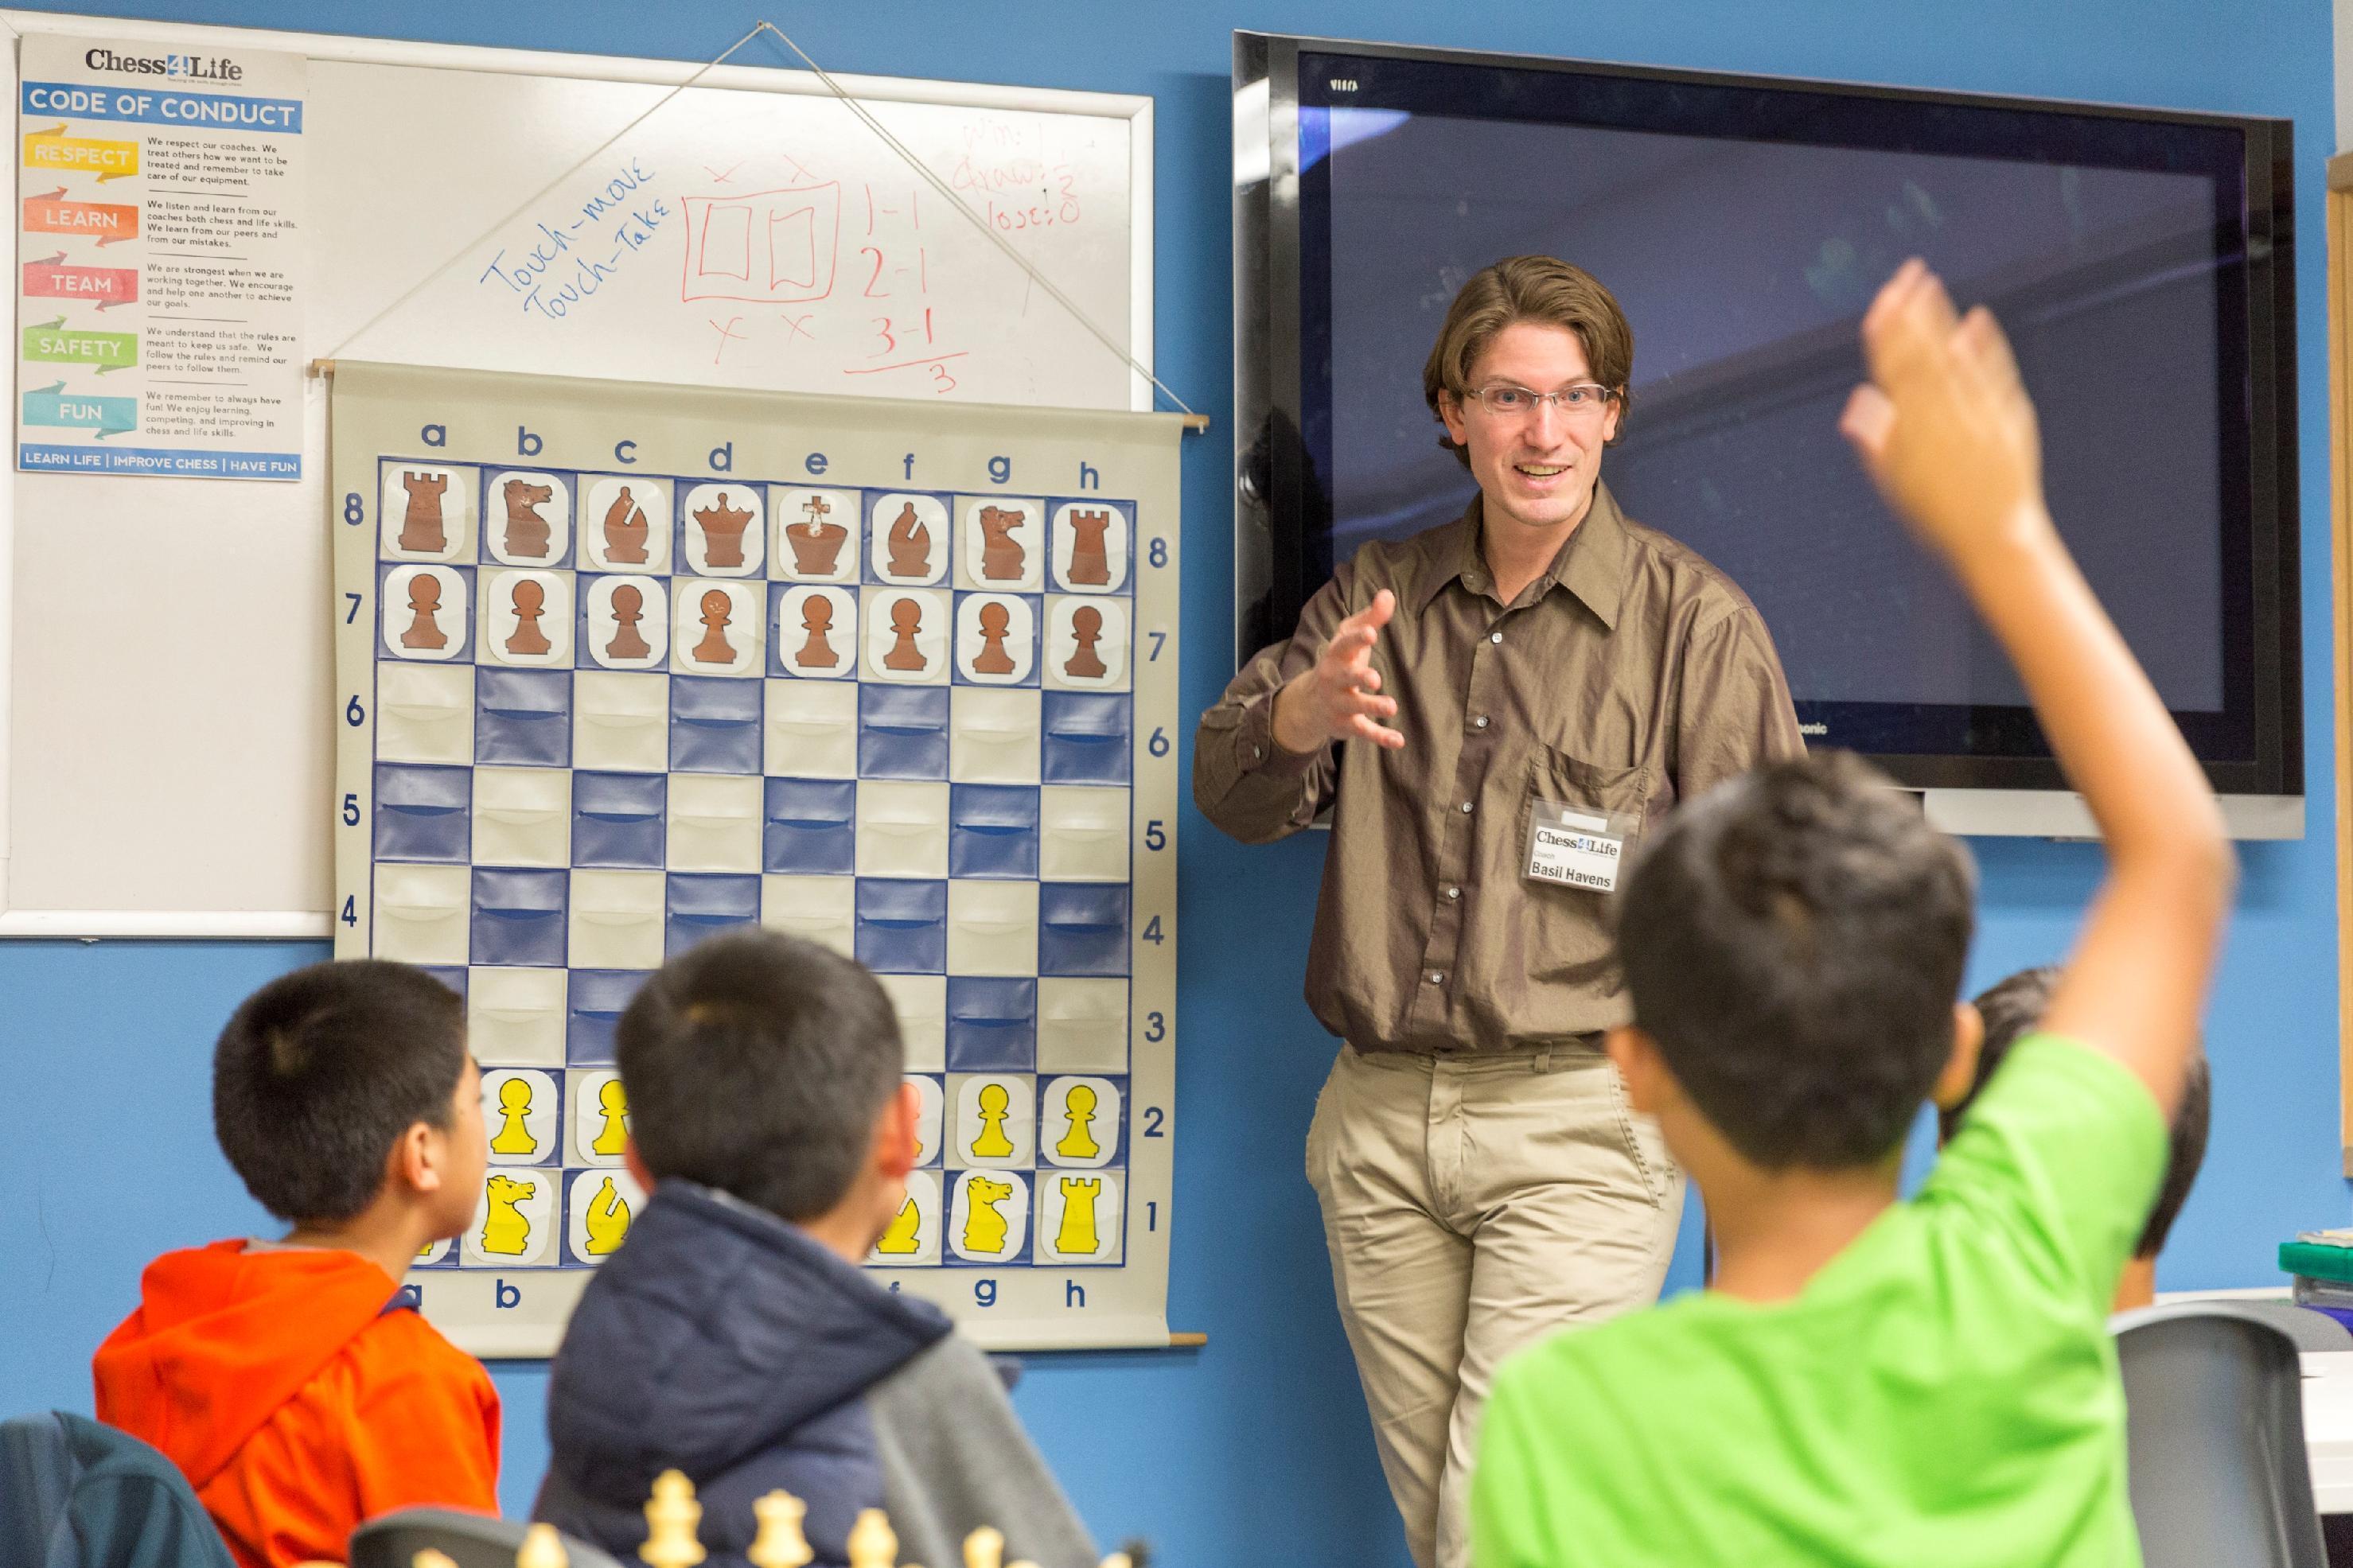 Students with varied chess skill levels in the same class